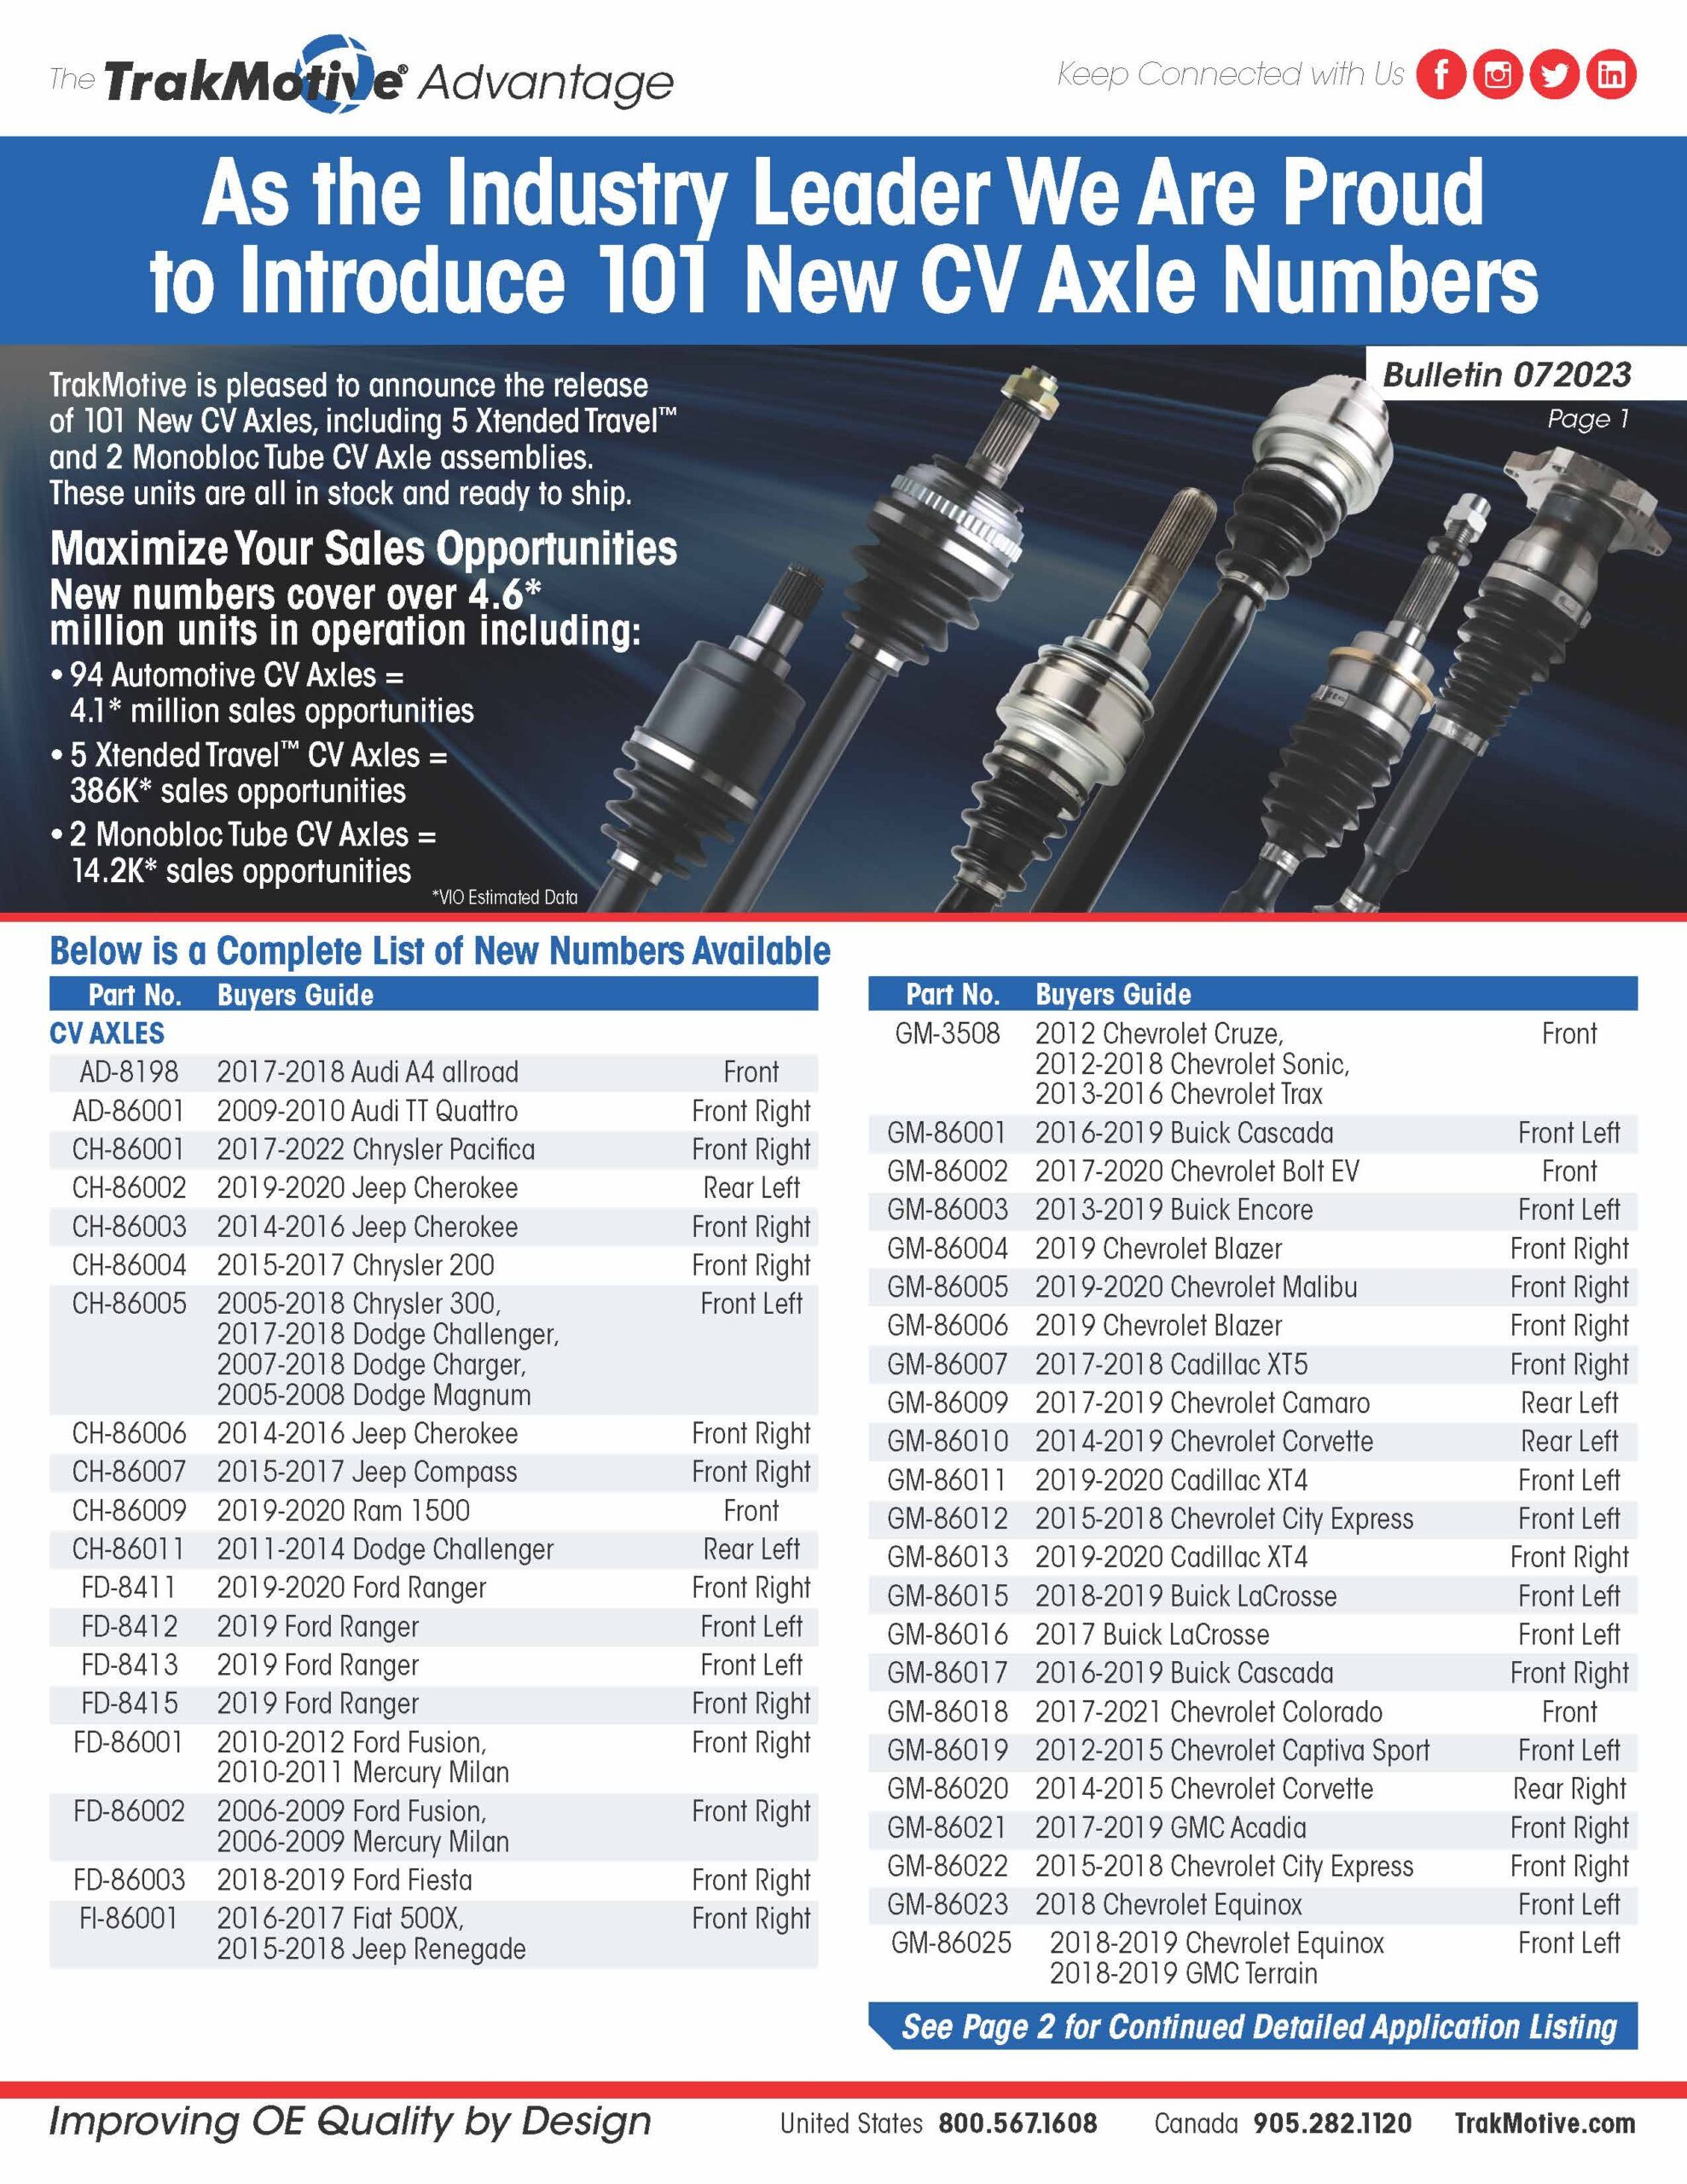 07/2023: TrakMotive Introduces 101 New CV Axle Numbers